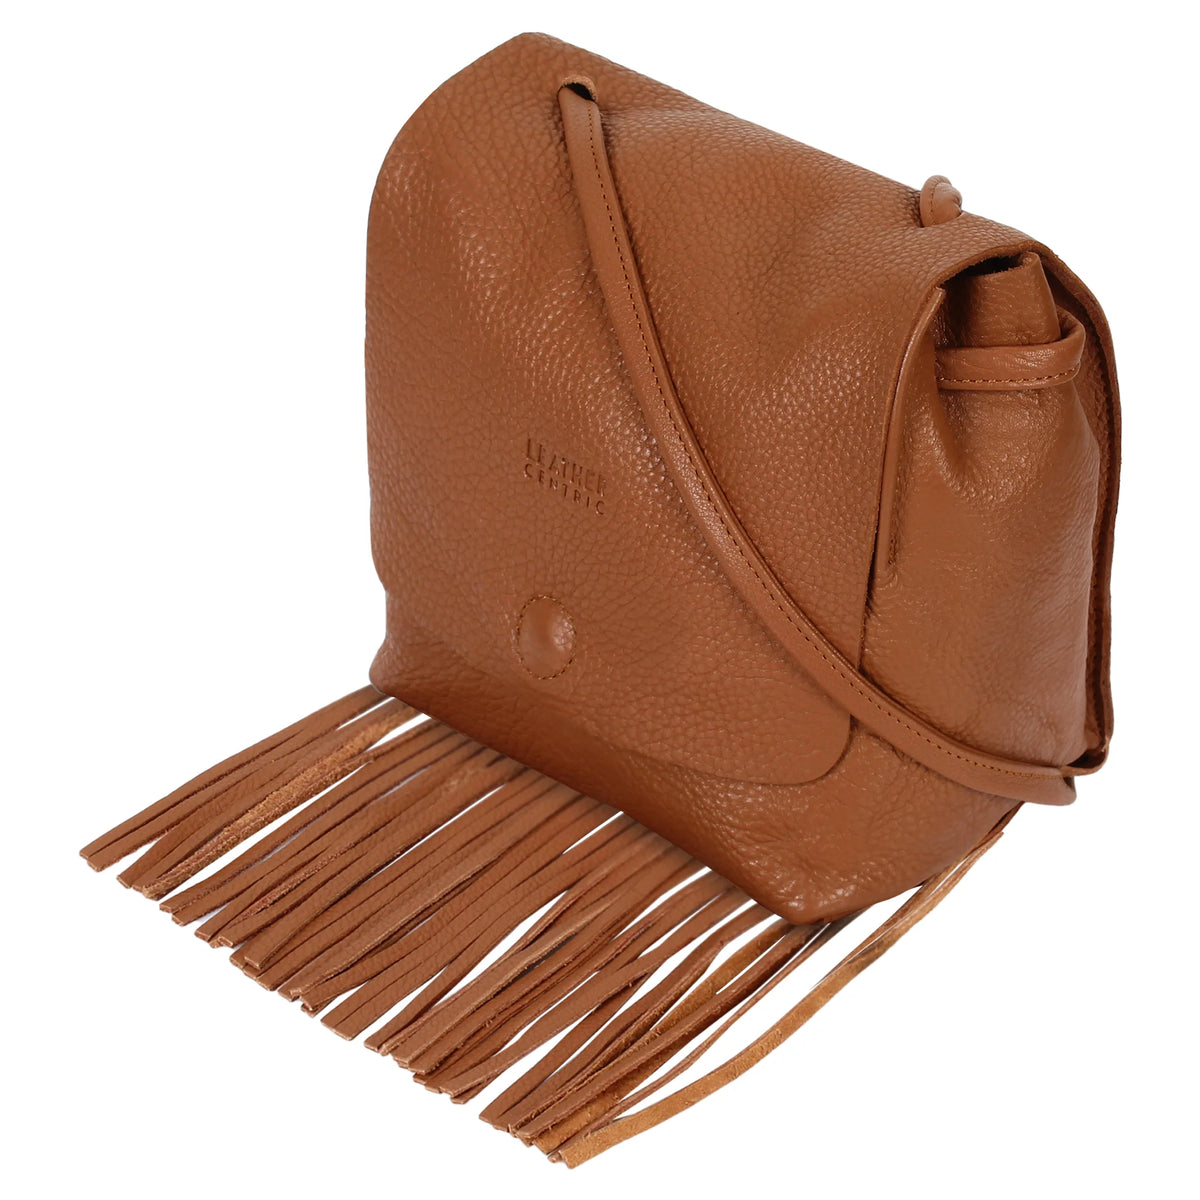 Brown Cross Body Bag Vegan Suede Leather Boho Embroidery Fringe and Tassel